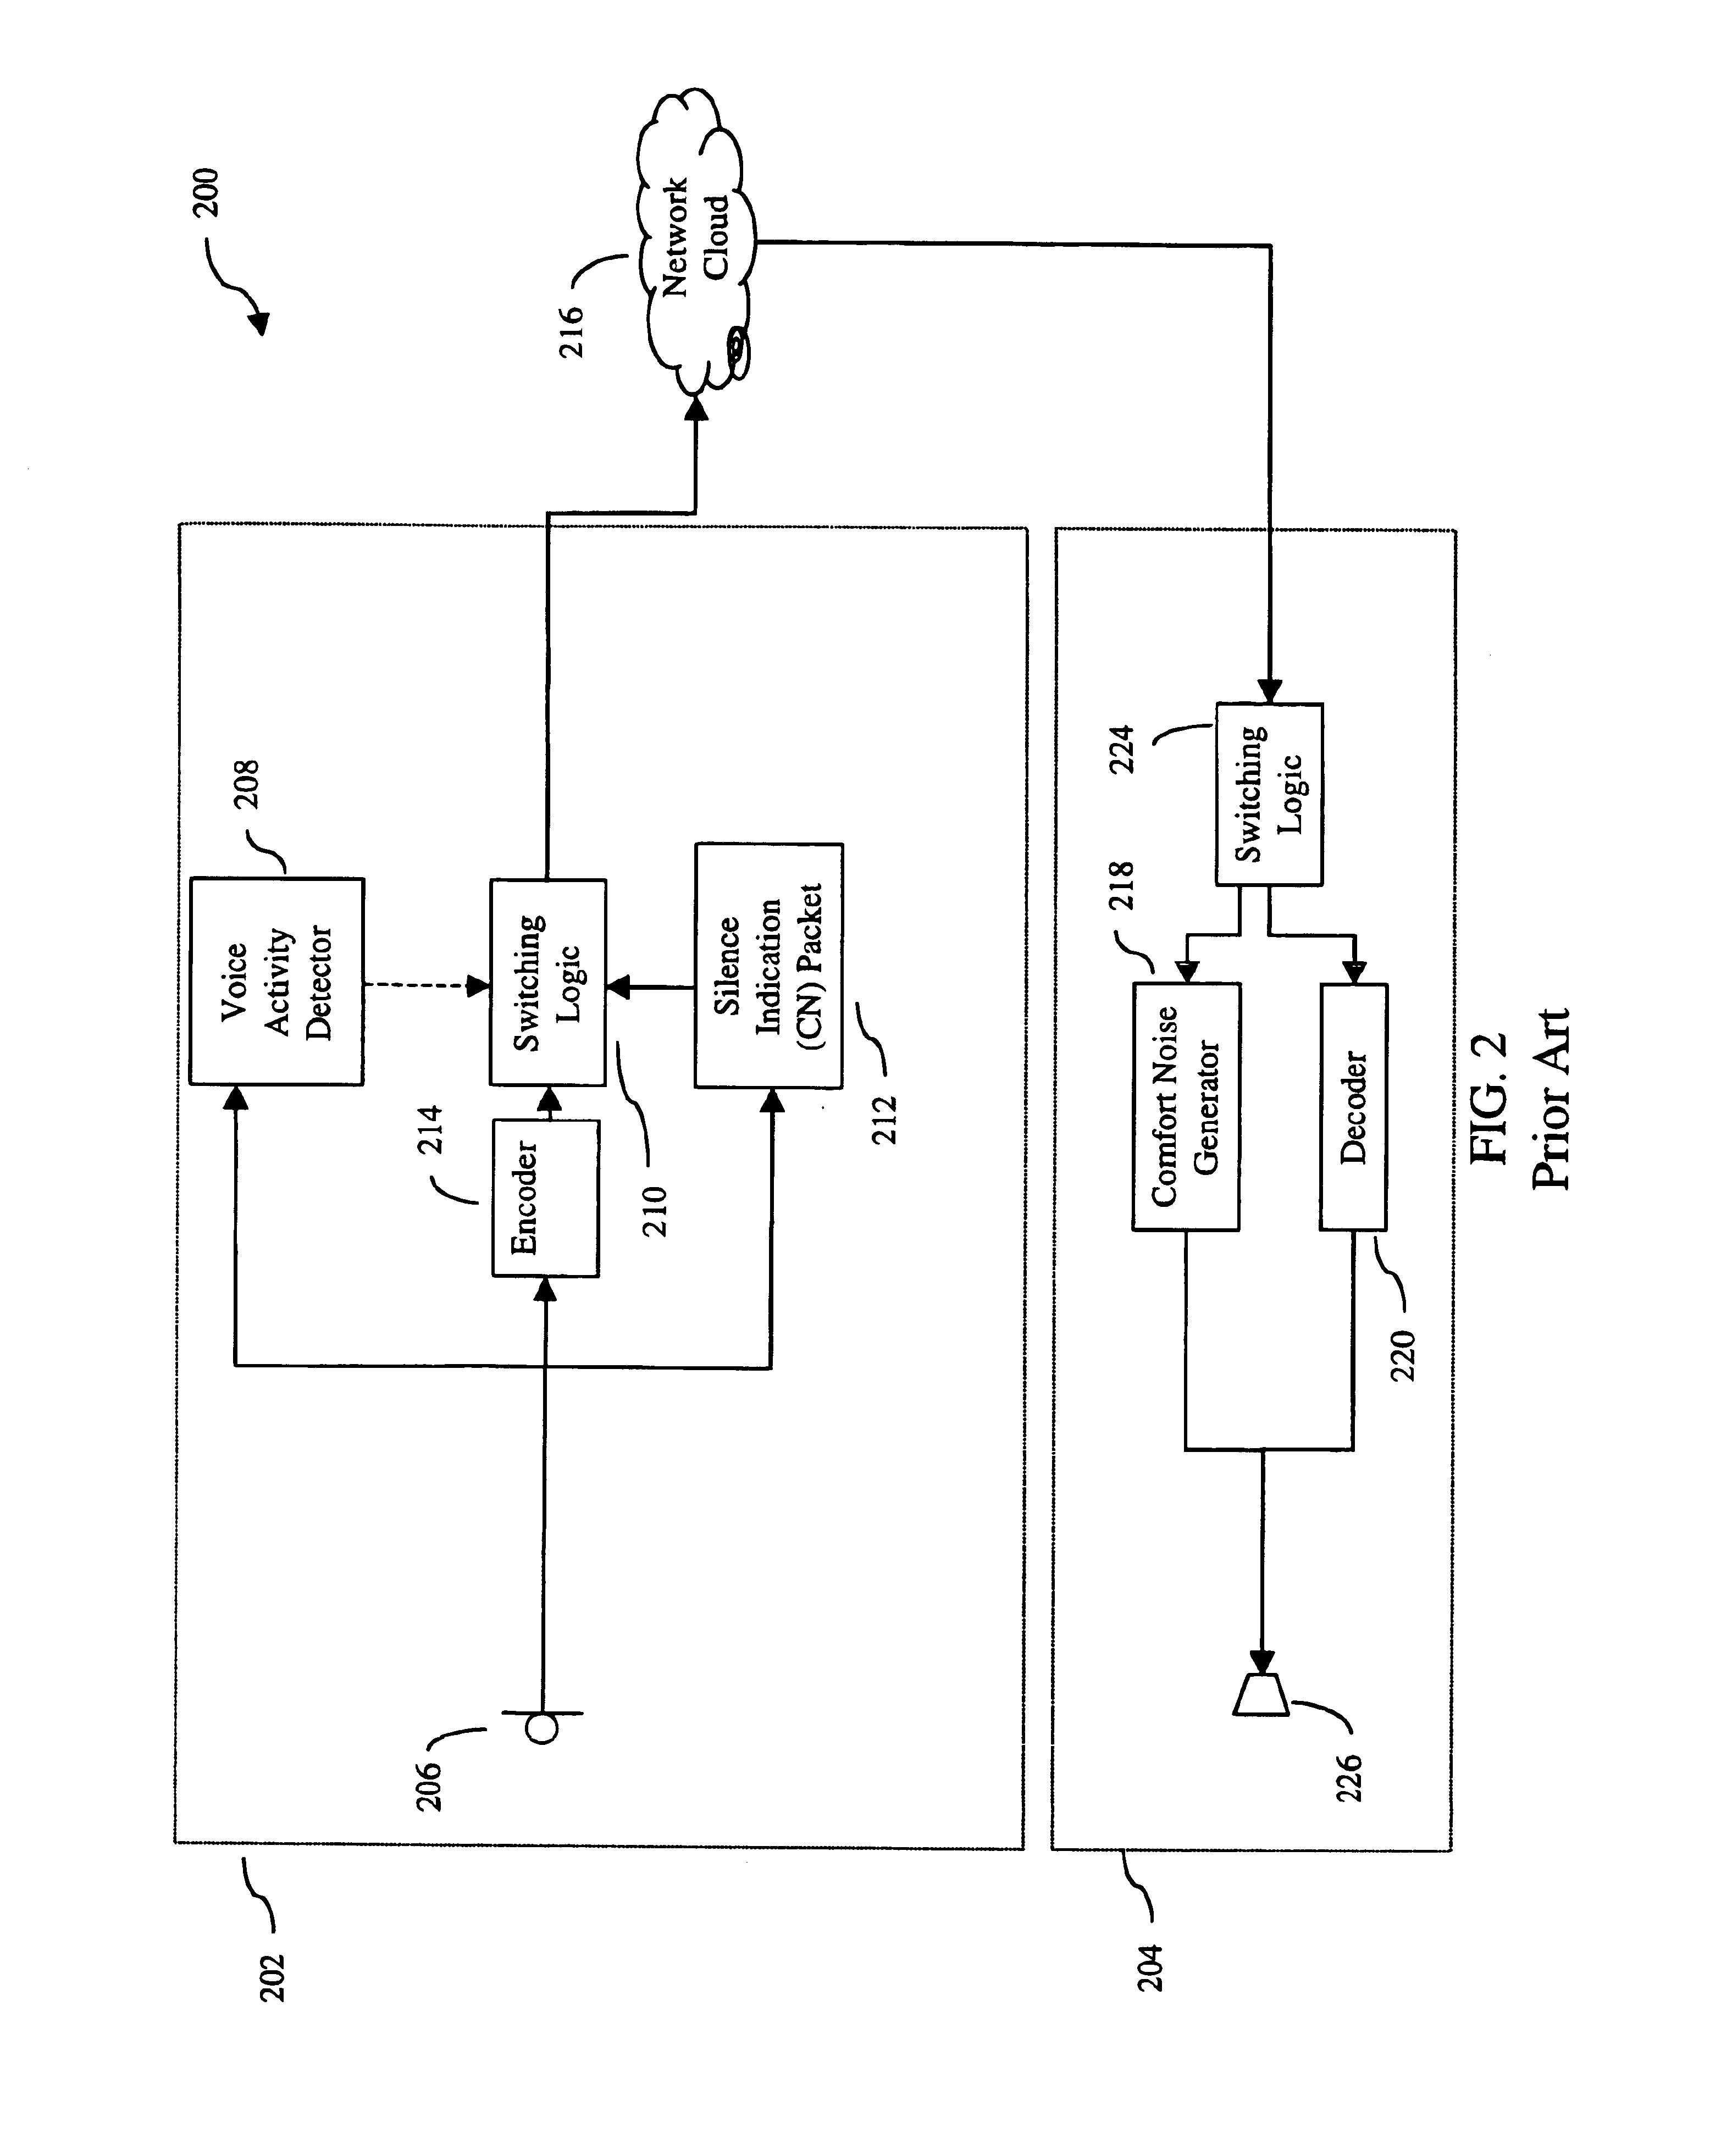 Method and apparatus for transitioning comfort noise in an IP-based telephony system